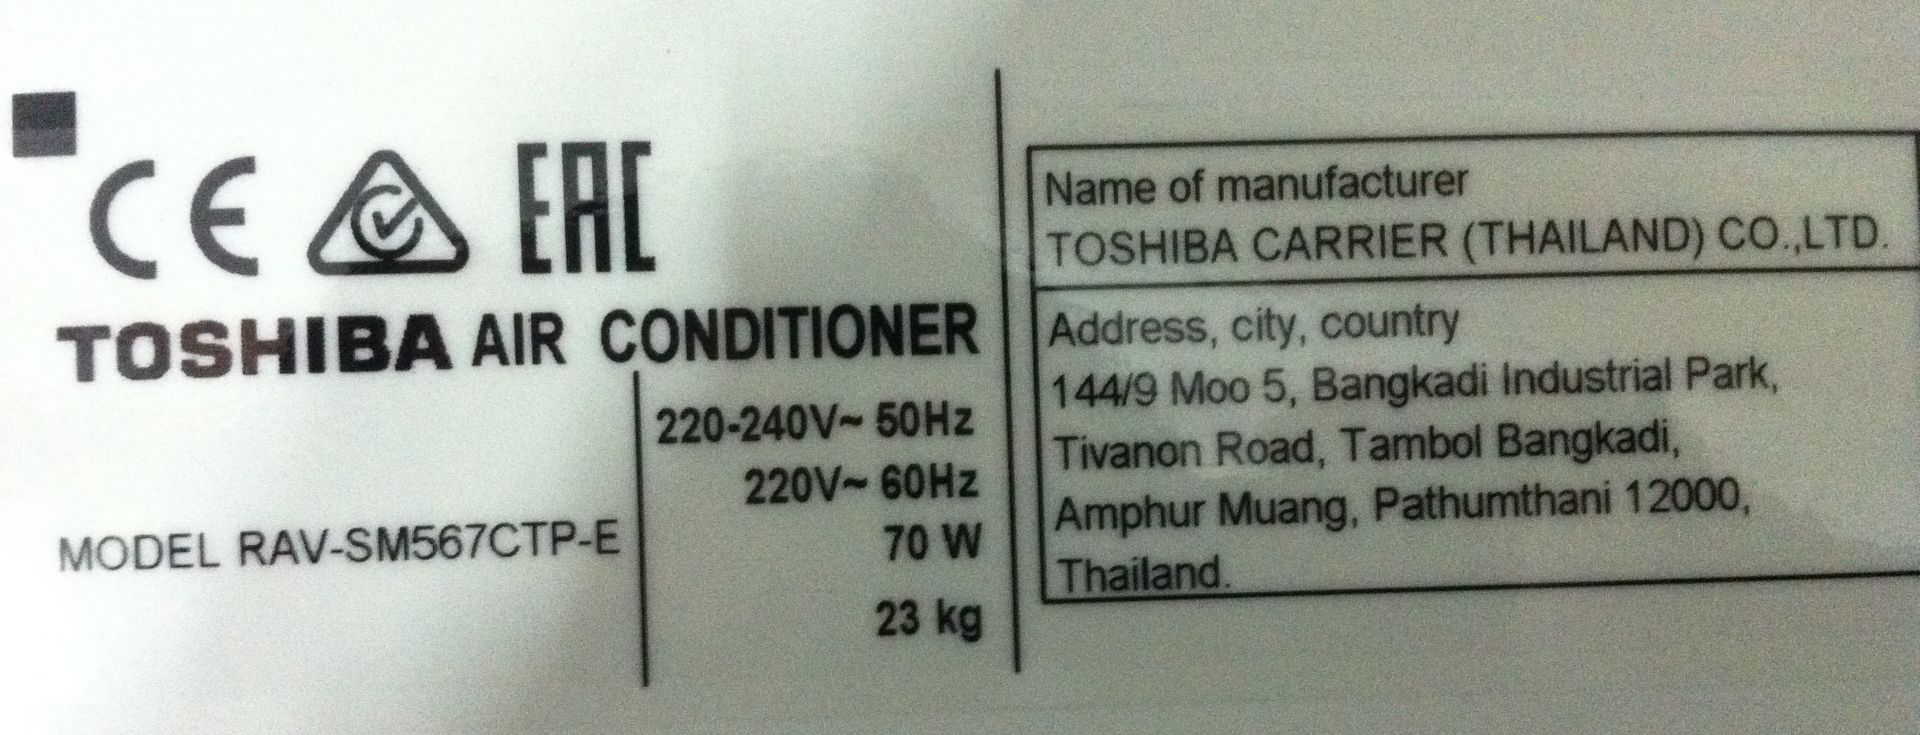 Toshiba Air Conditioning Unit - Image 2 of 3